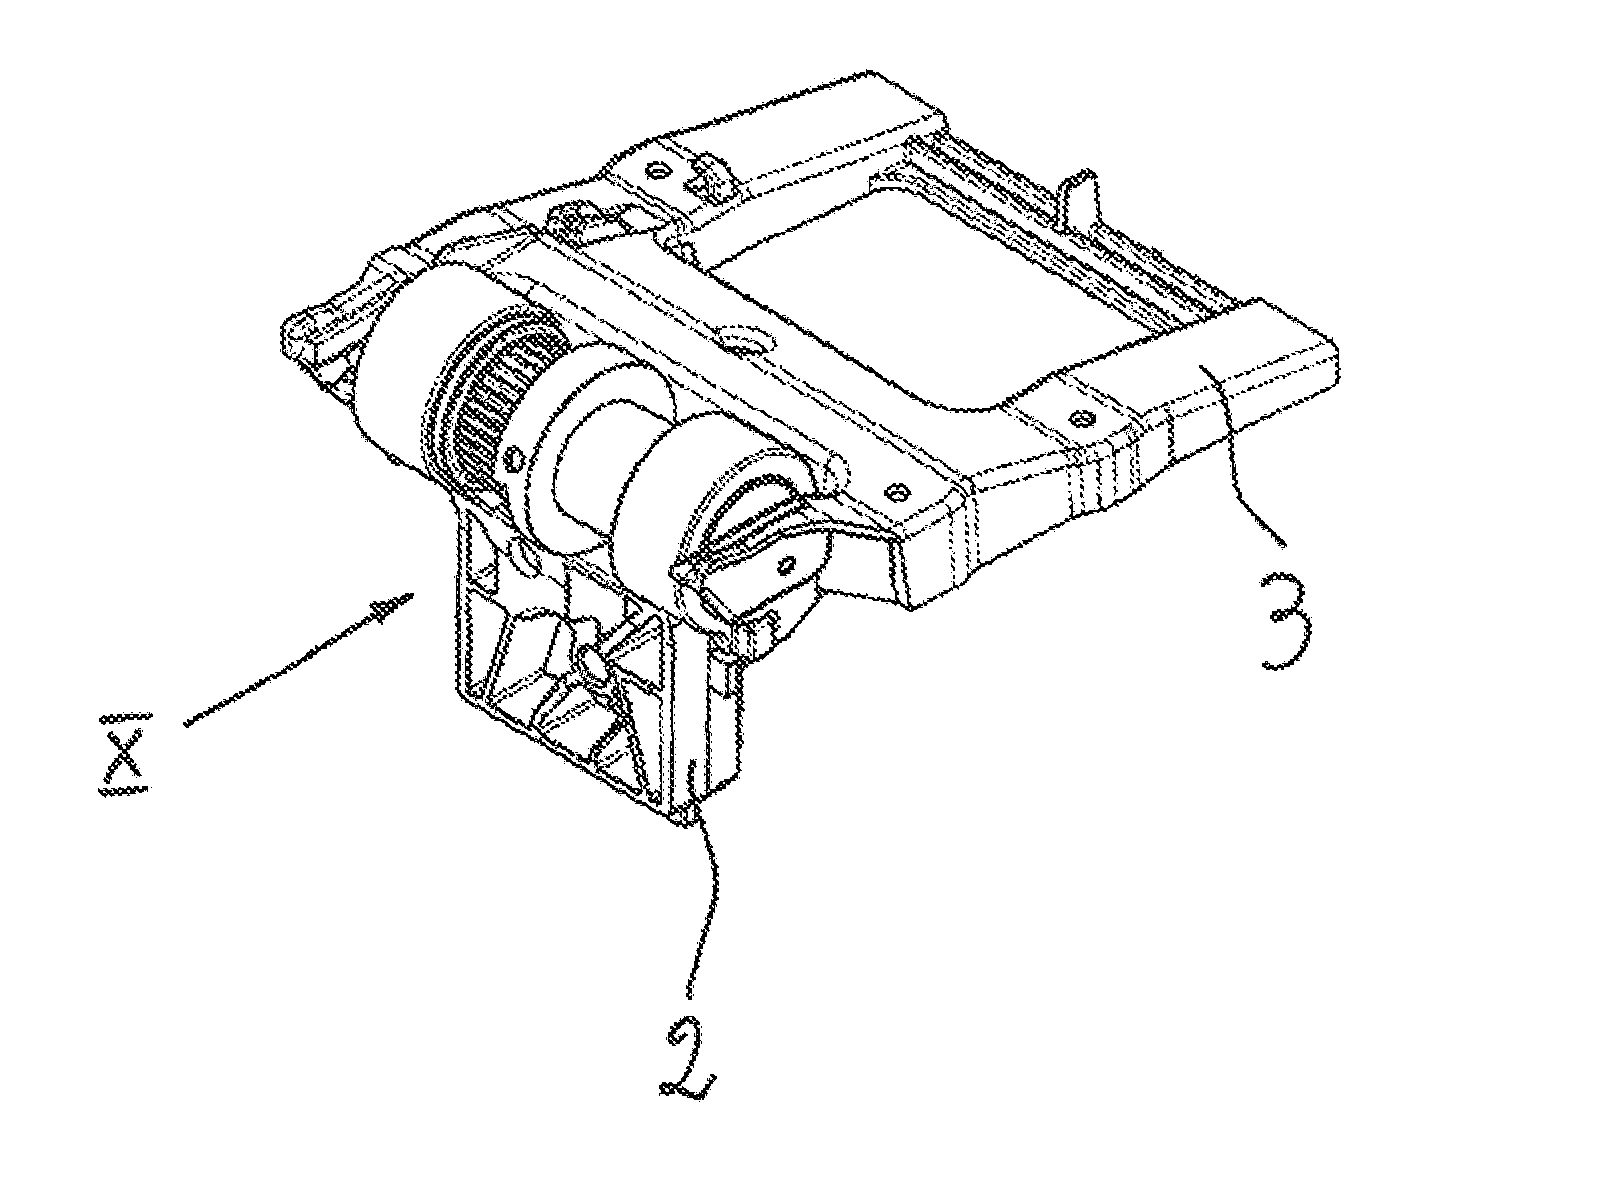 Arm-rest adjustable in inclination, in particular for vehicles